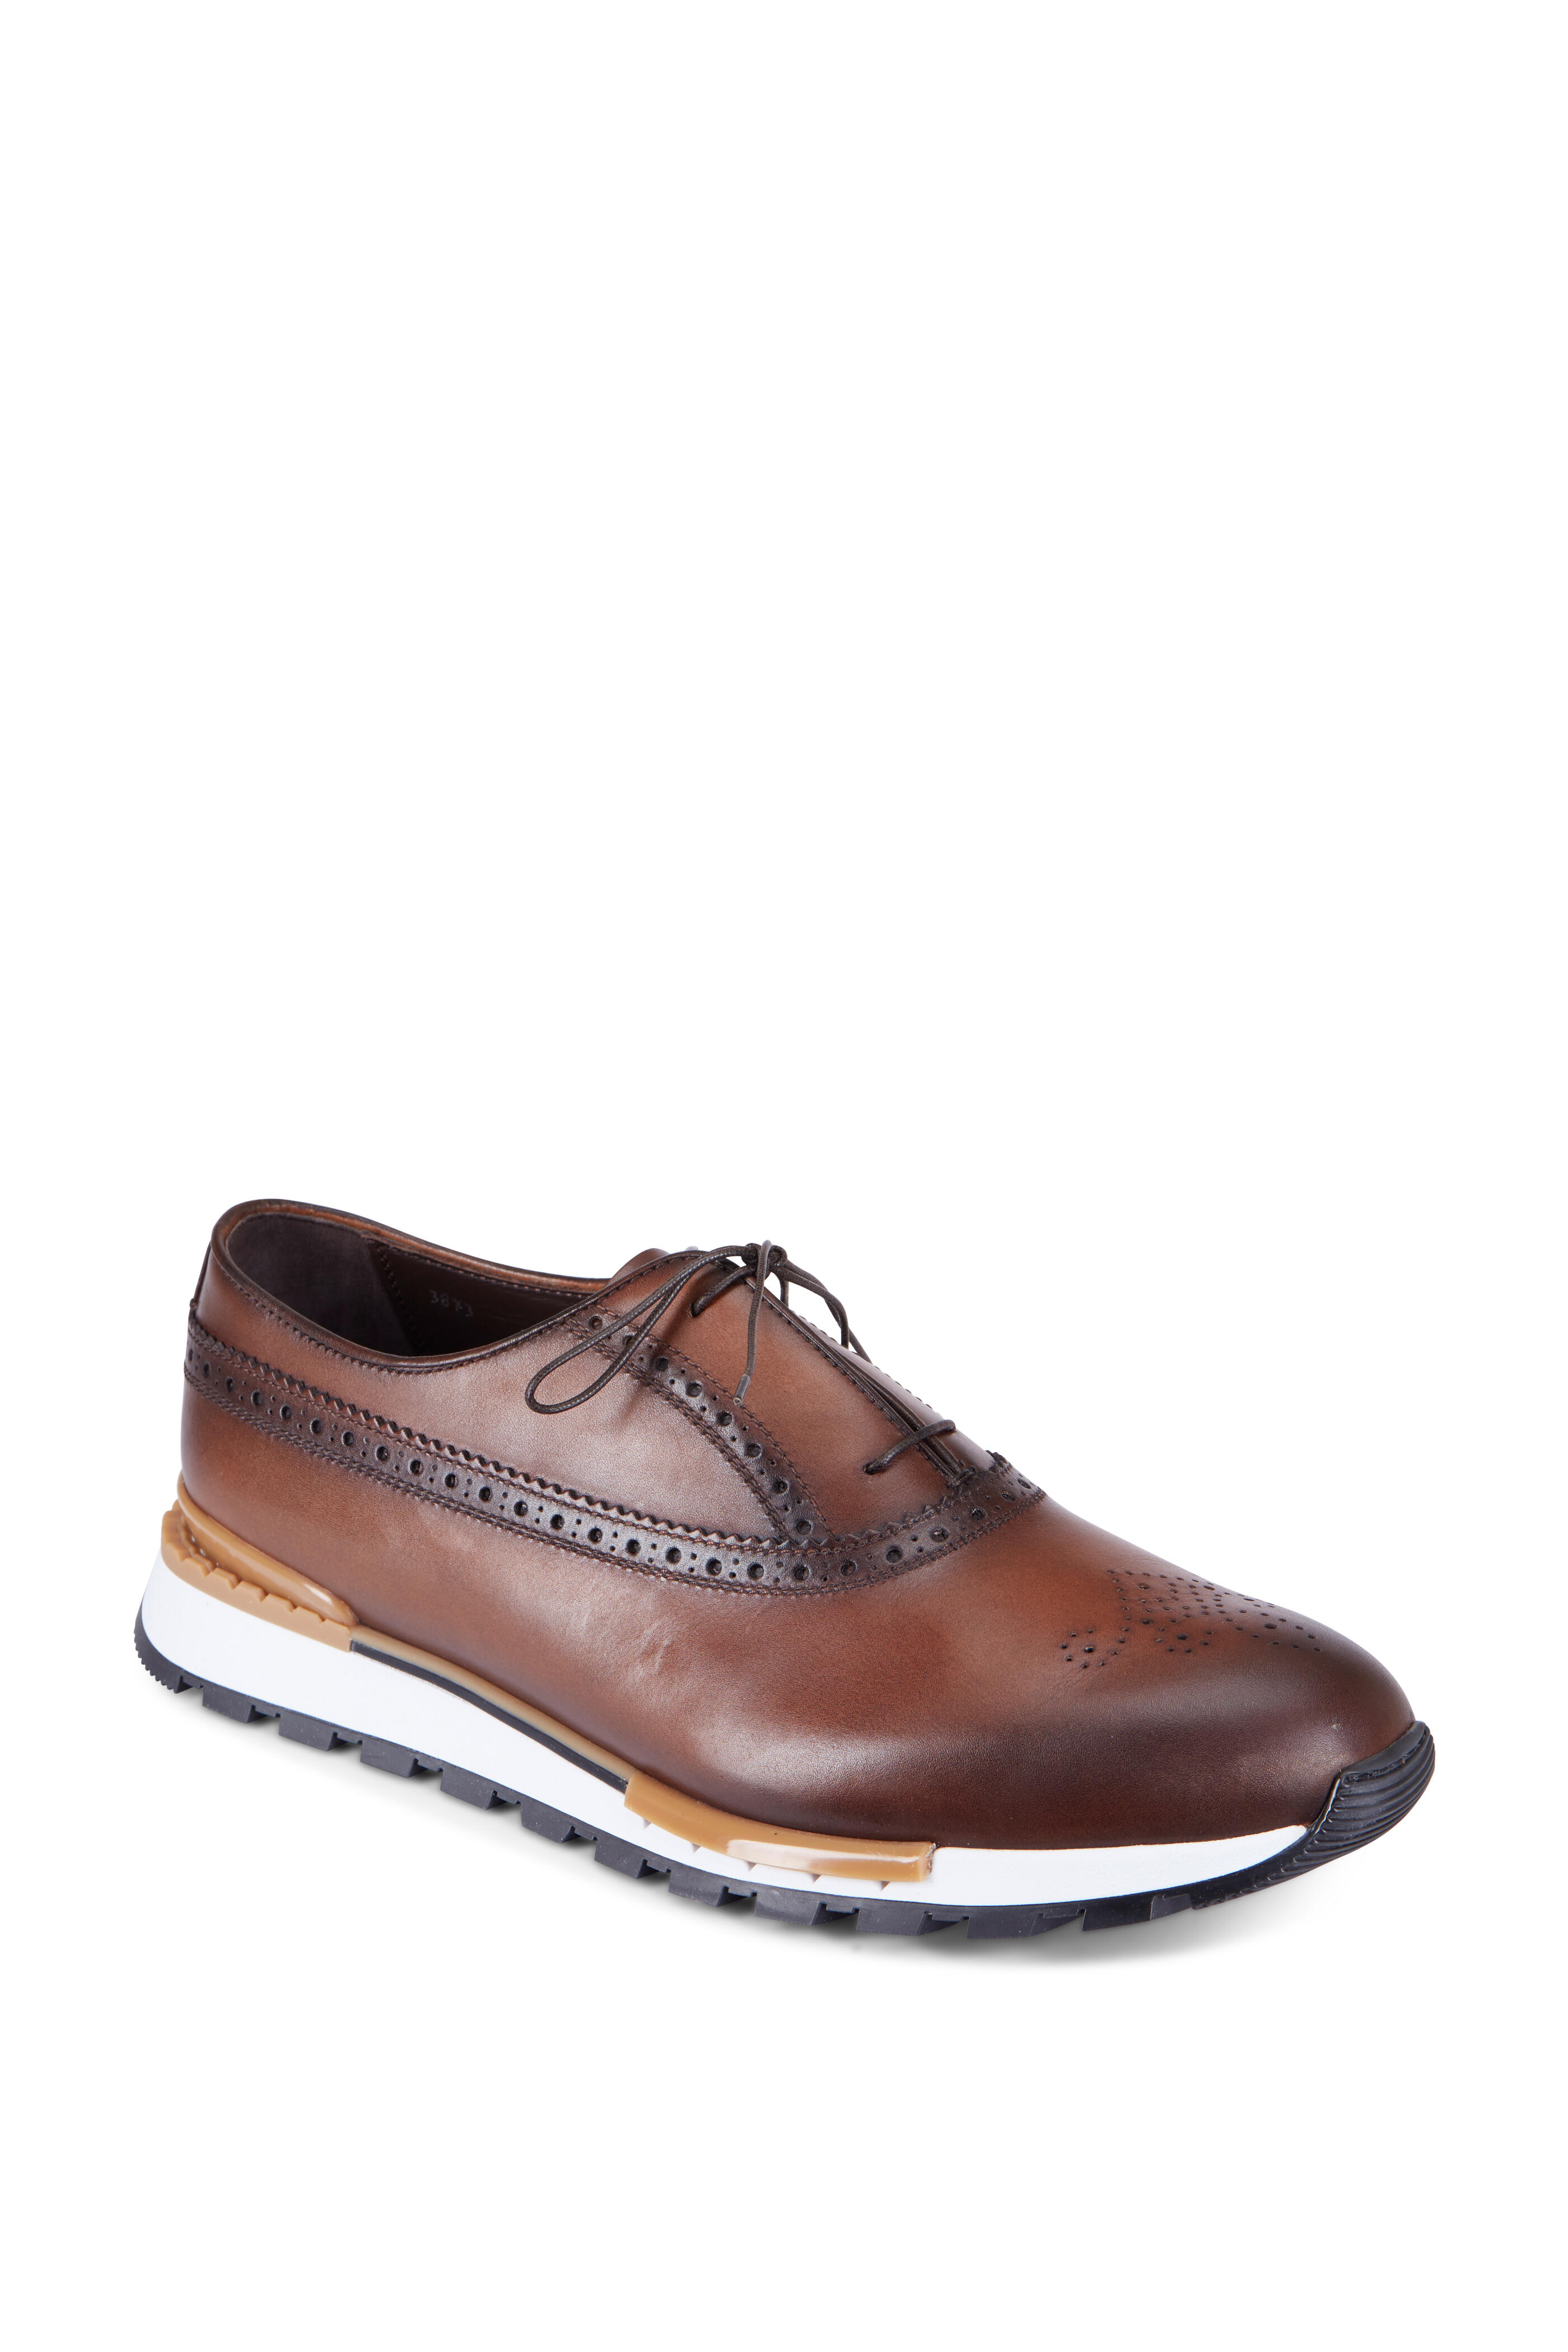 Fast Track Leather Sneakers in Brown - Berluti